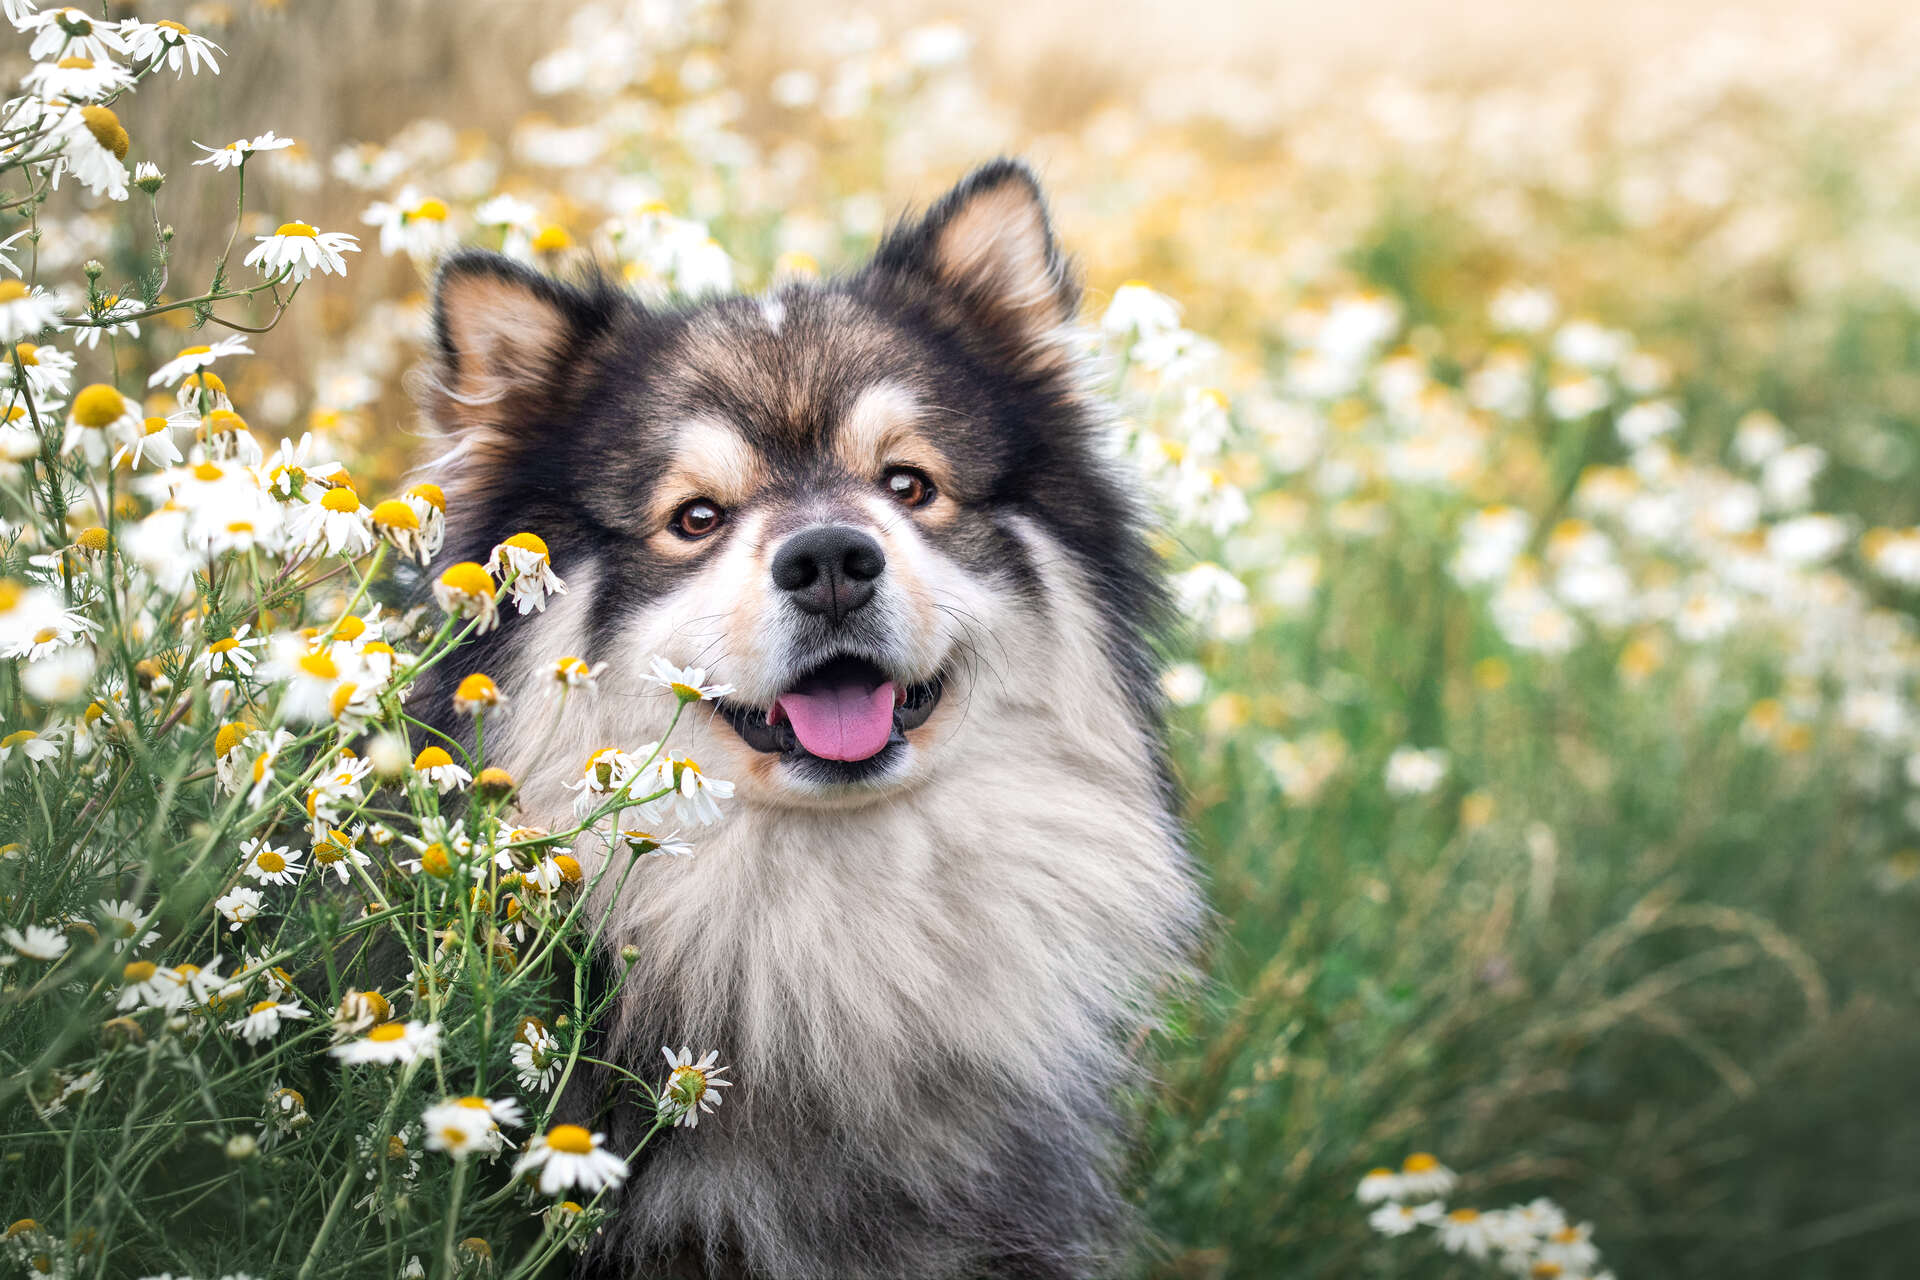 A dog sitting among flowers in a garden